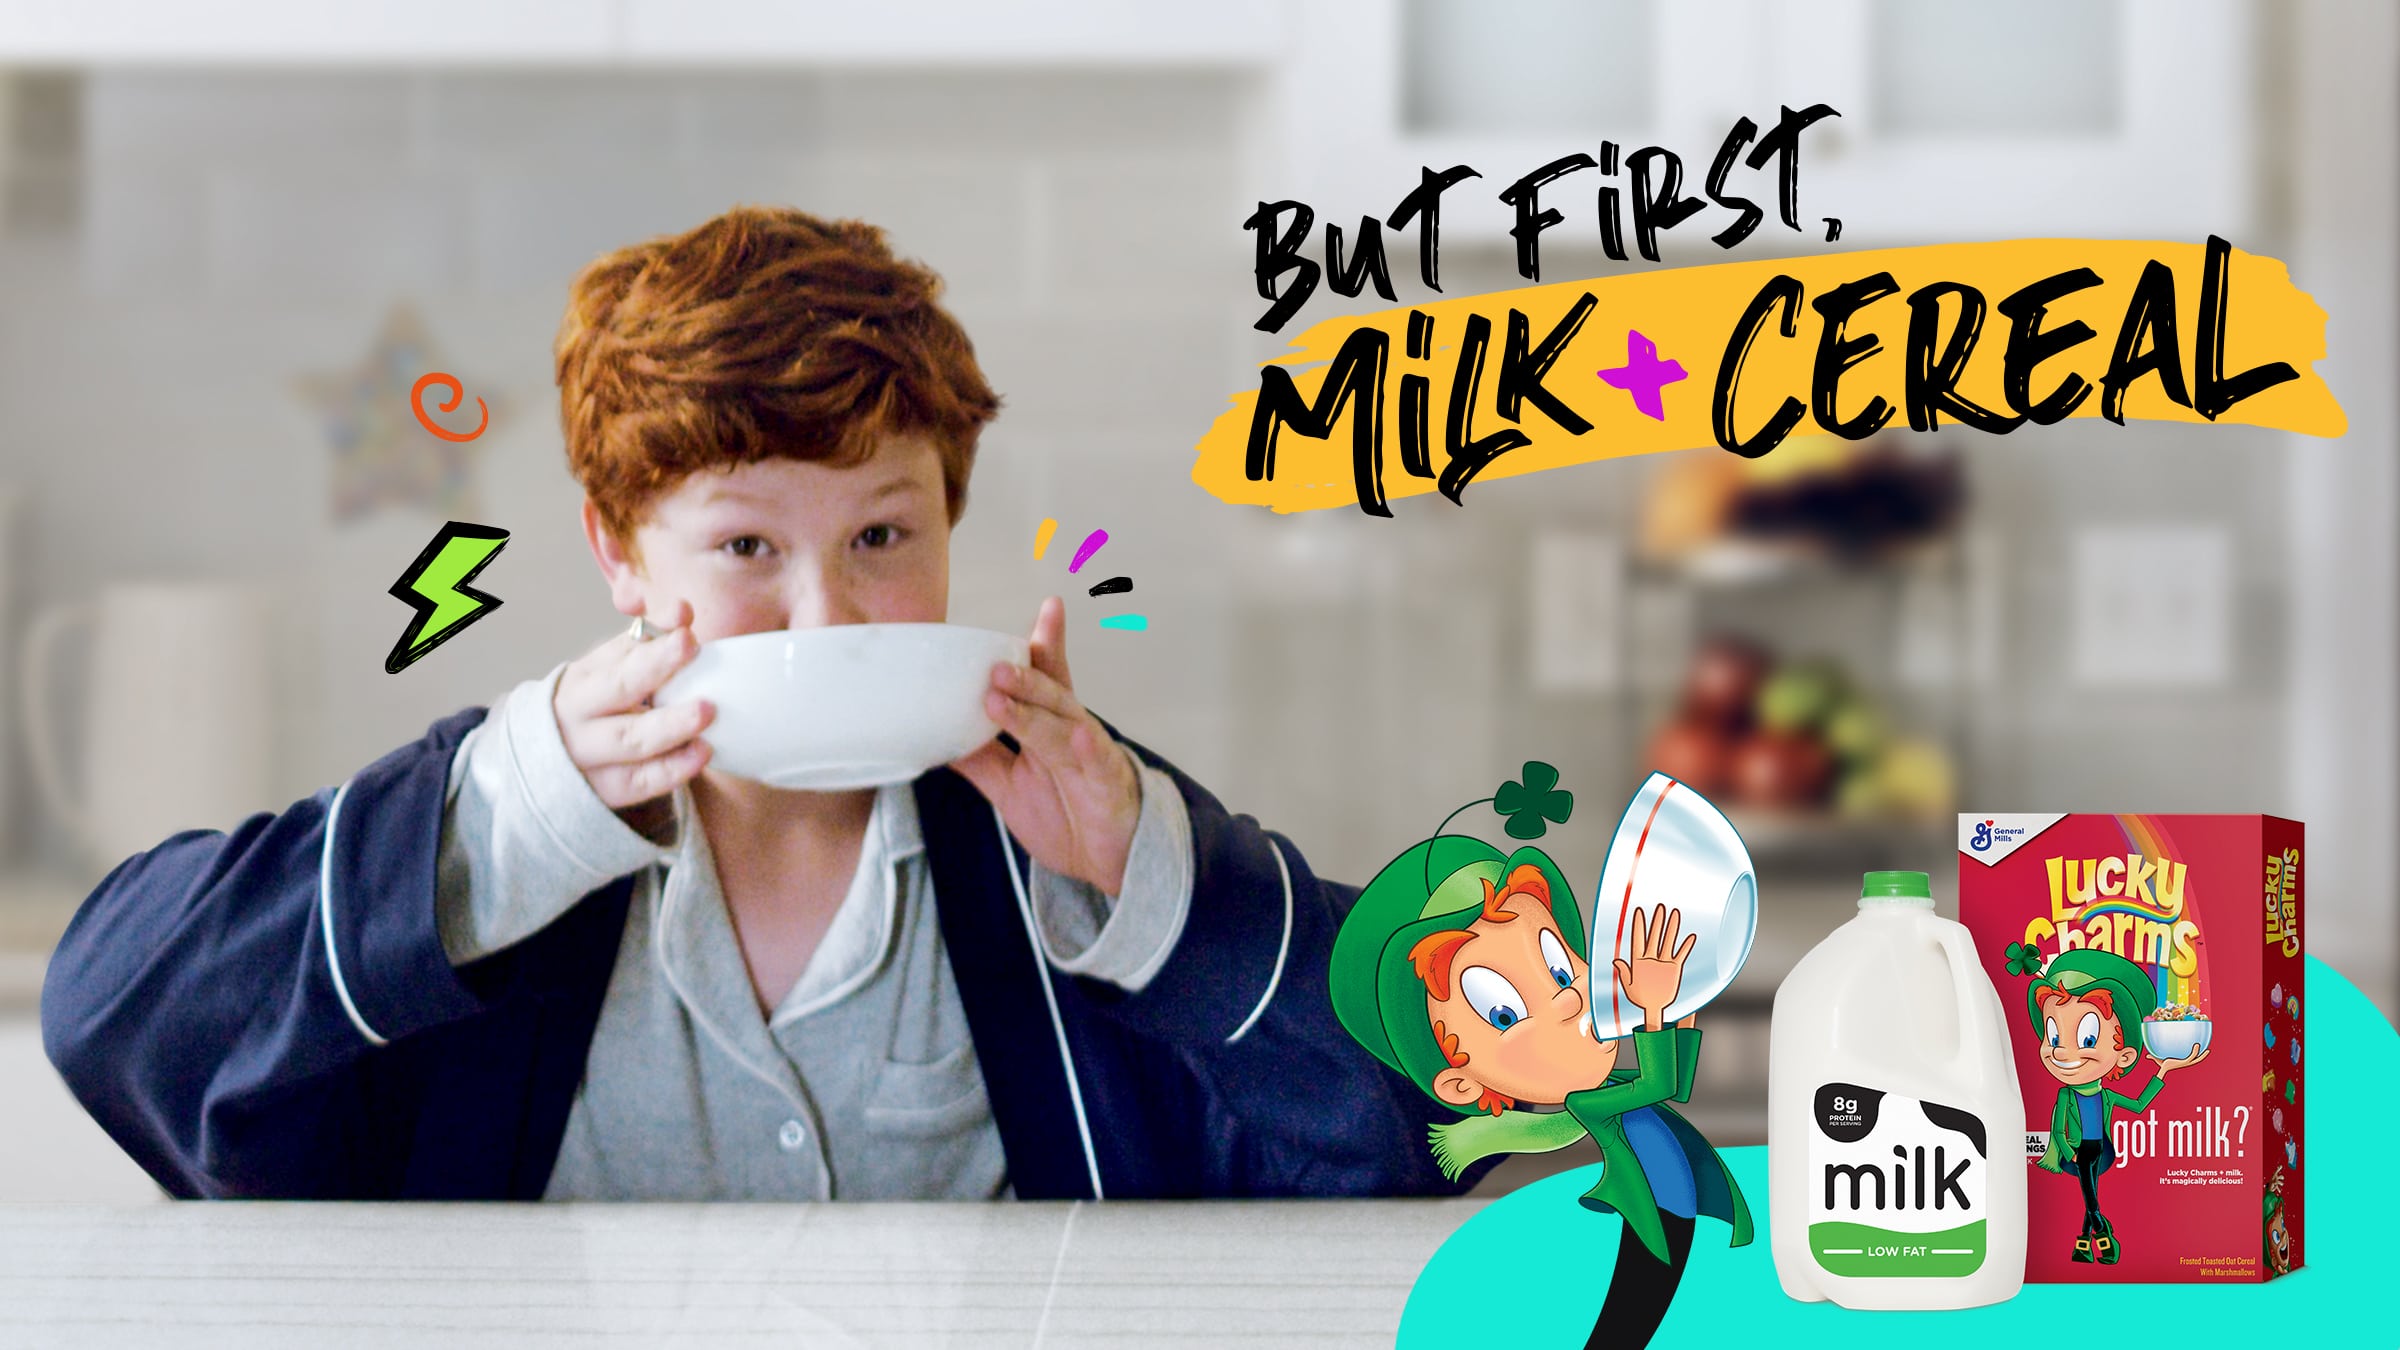 ‘got milk?’ Relaunches with New, Modern Look to Appeal to Kids, Families